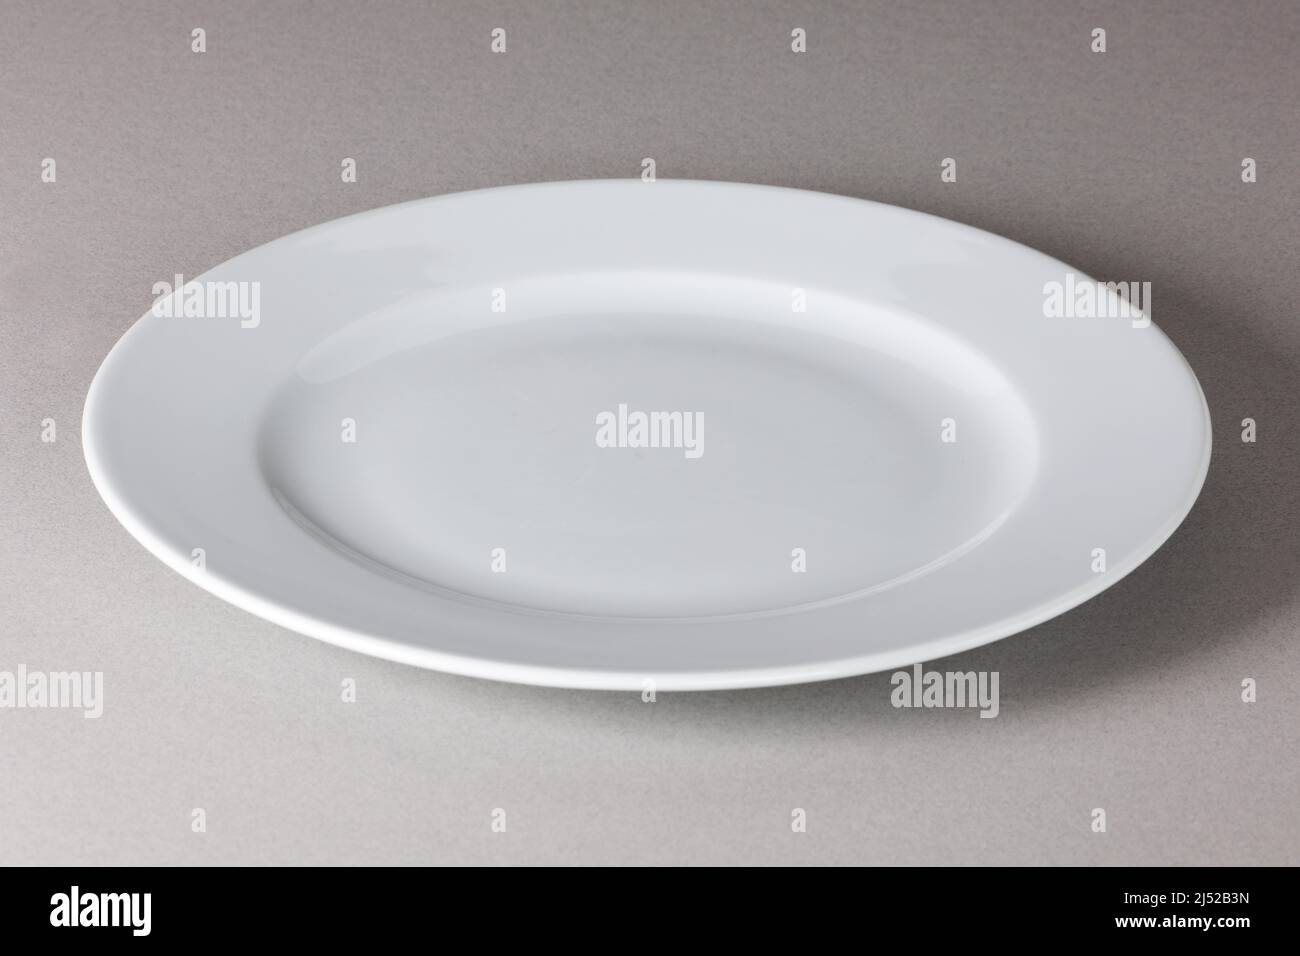 Raised view of a white dinner plate on neutral background with shadow Stock Photo